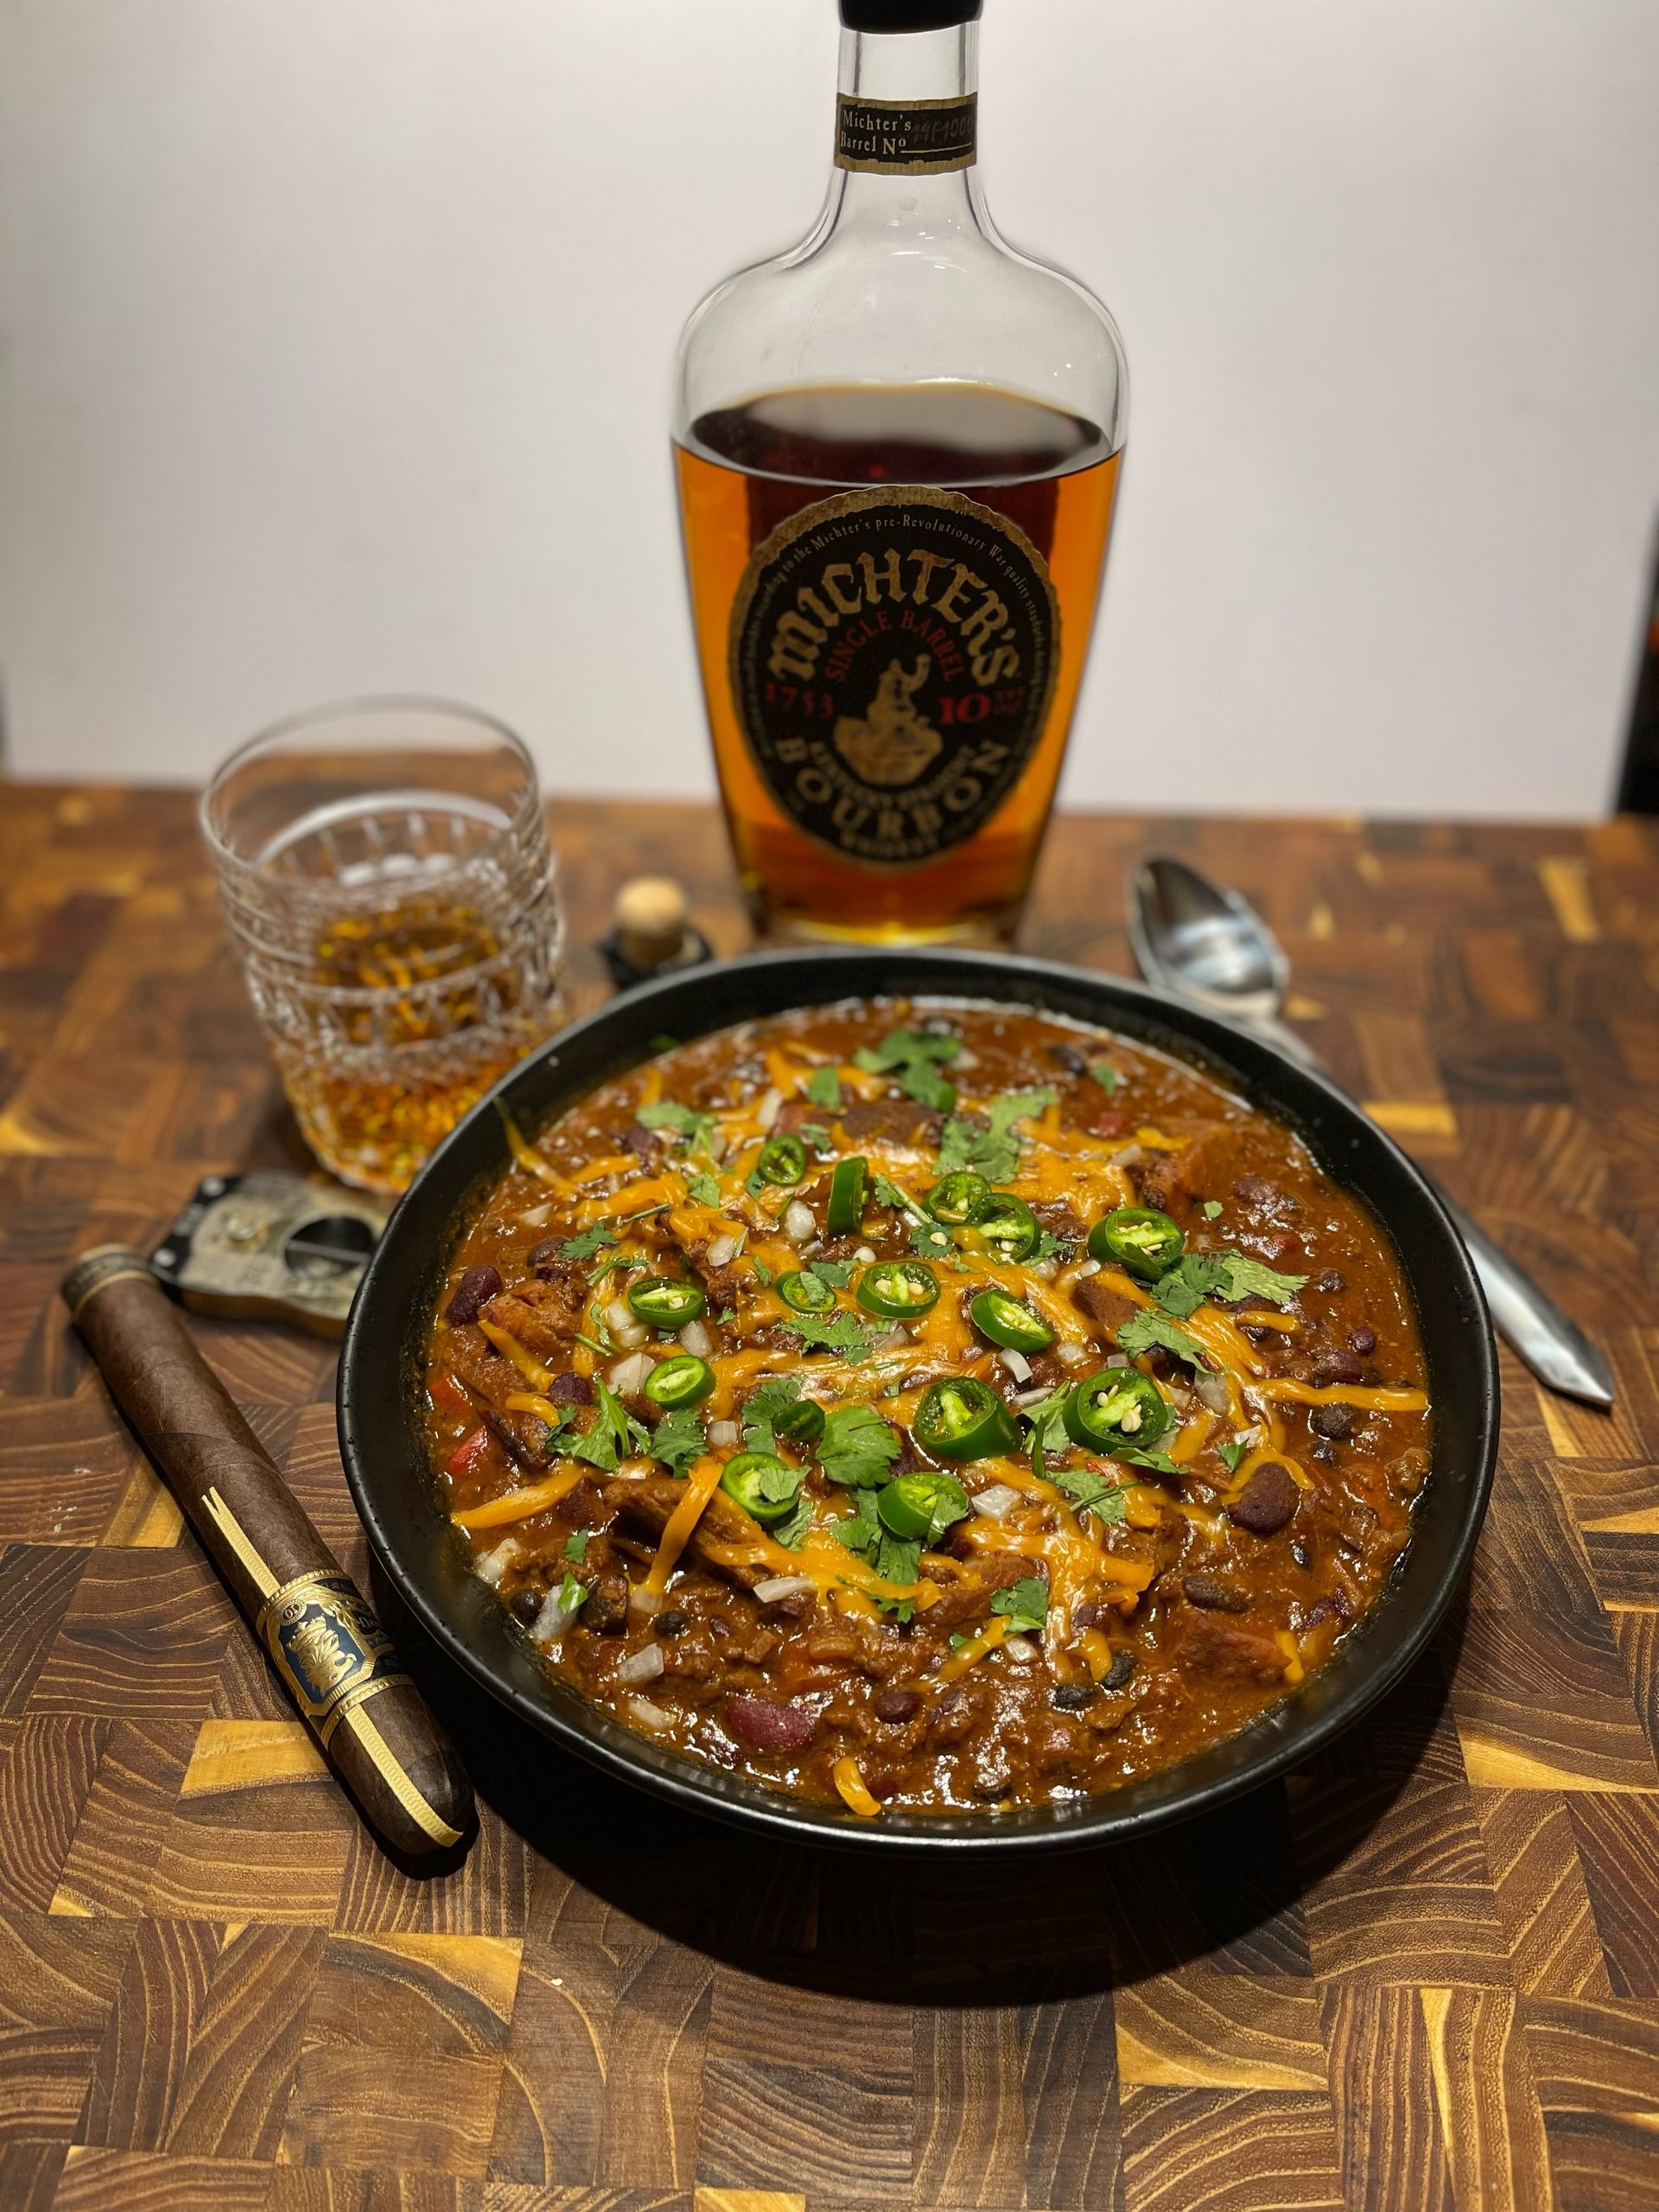 Darkside of the Grill - Shares his Game Day Brisket Chili Recipe